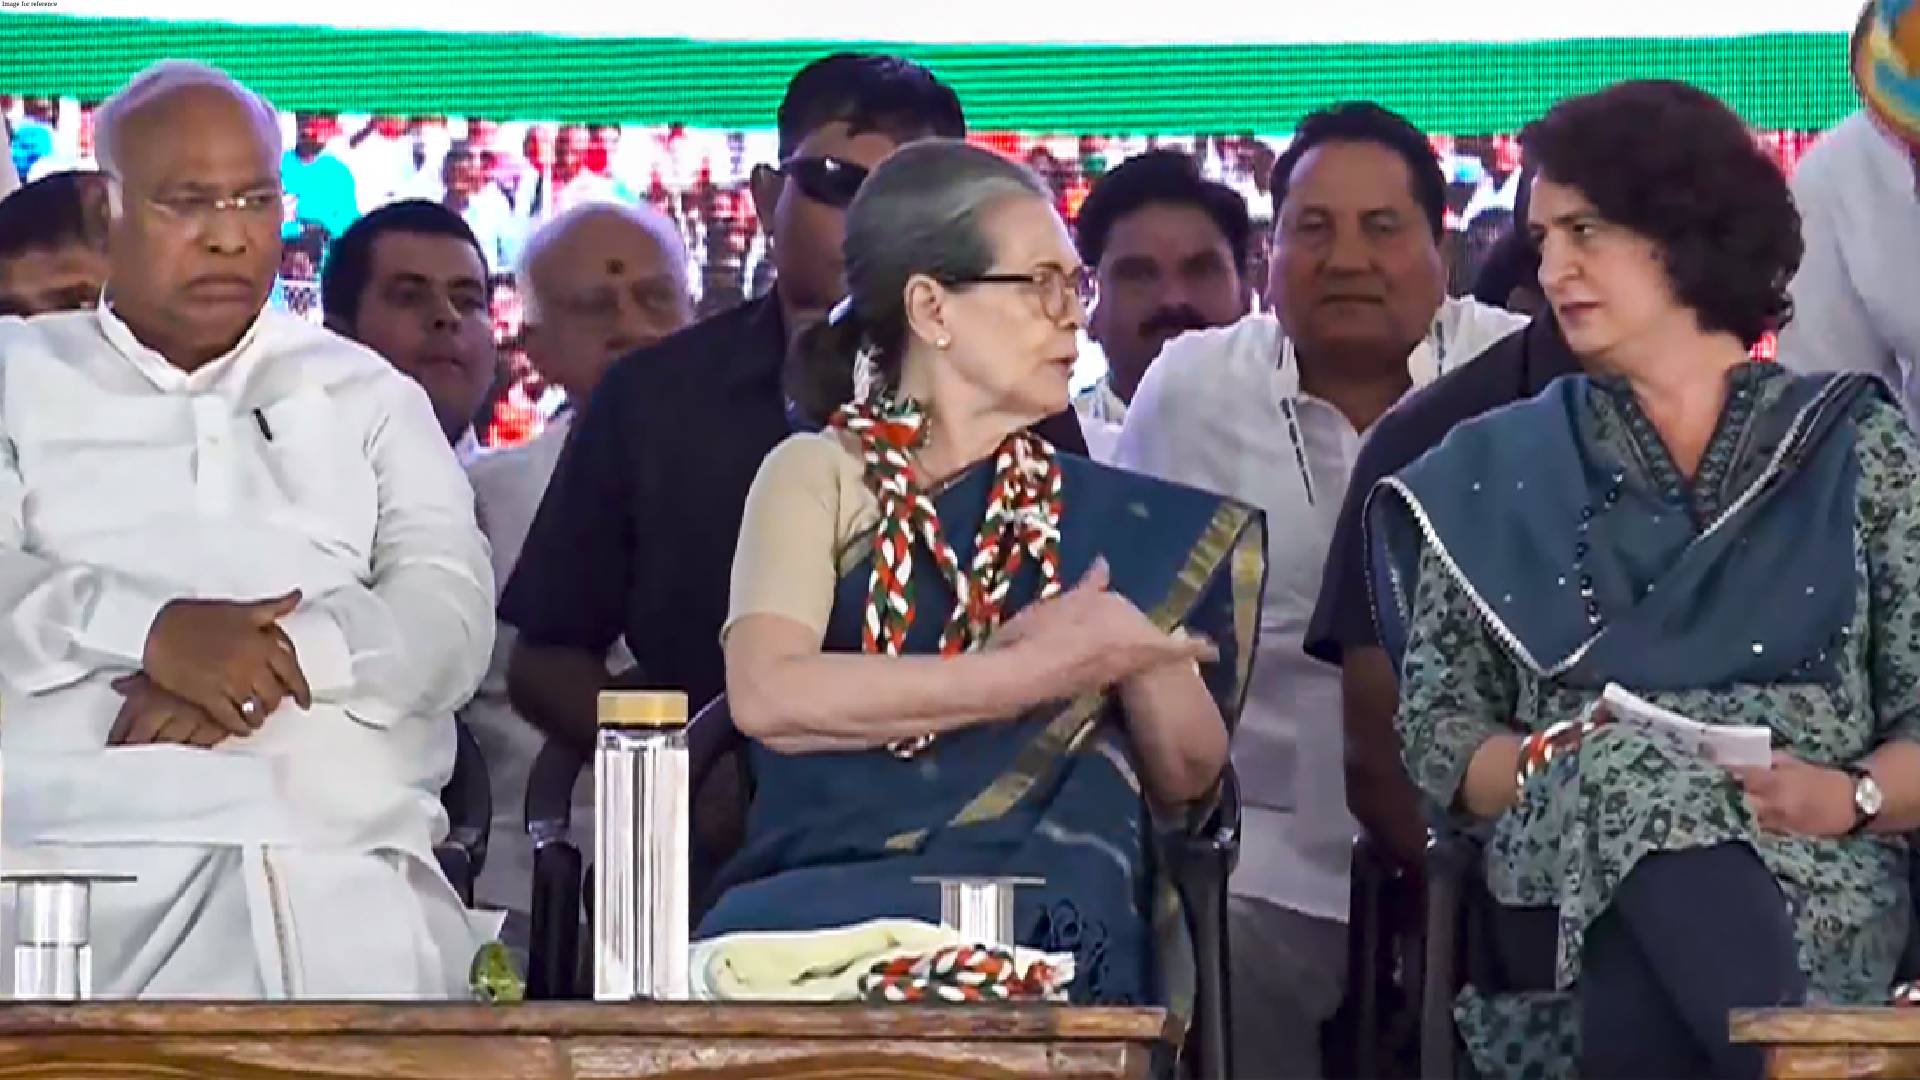 Sonia Gandhi accuses PM Modi of tearing apart country's dignity, democracy